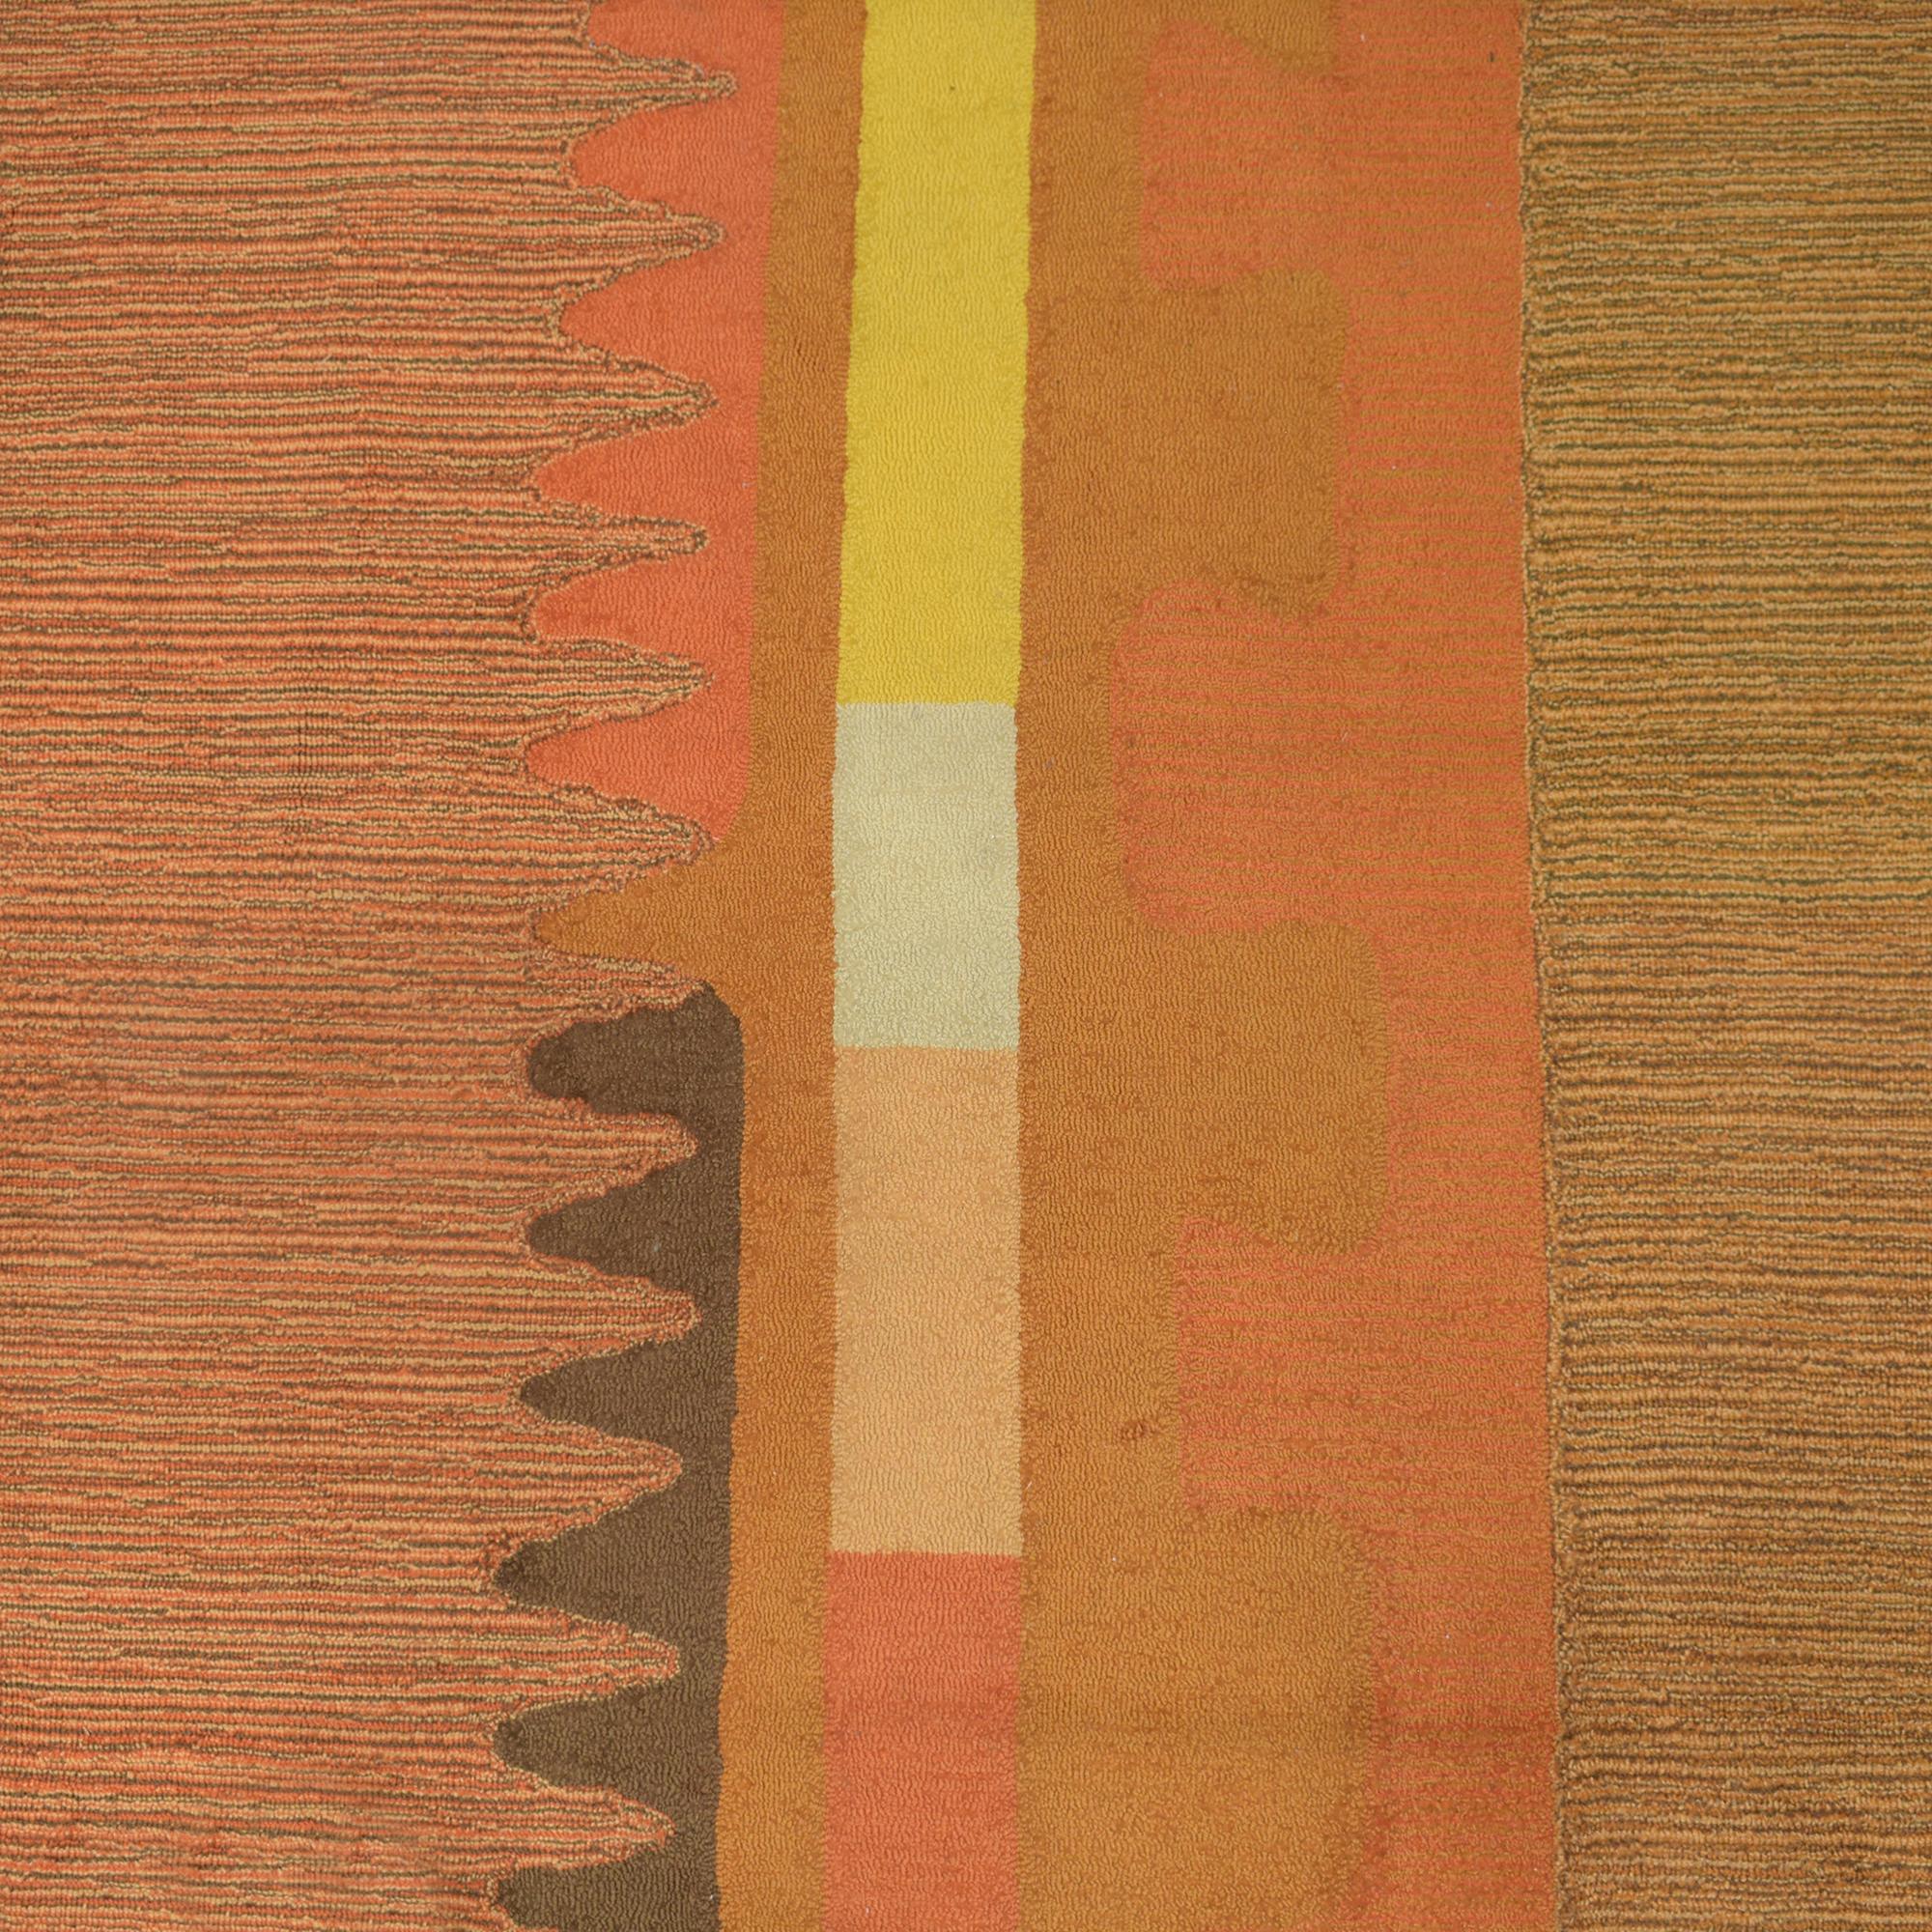 1970s Edward Fields Modern-style Wool Area Rug: Authentic Designer Piece For Sale 1